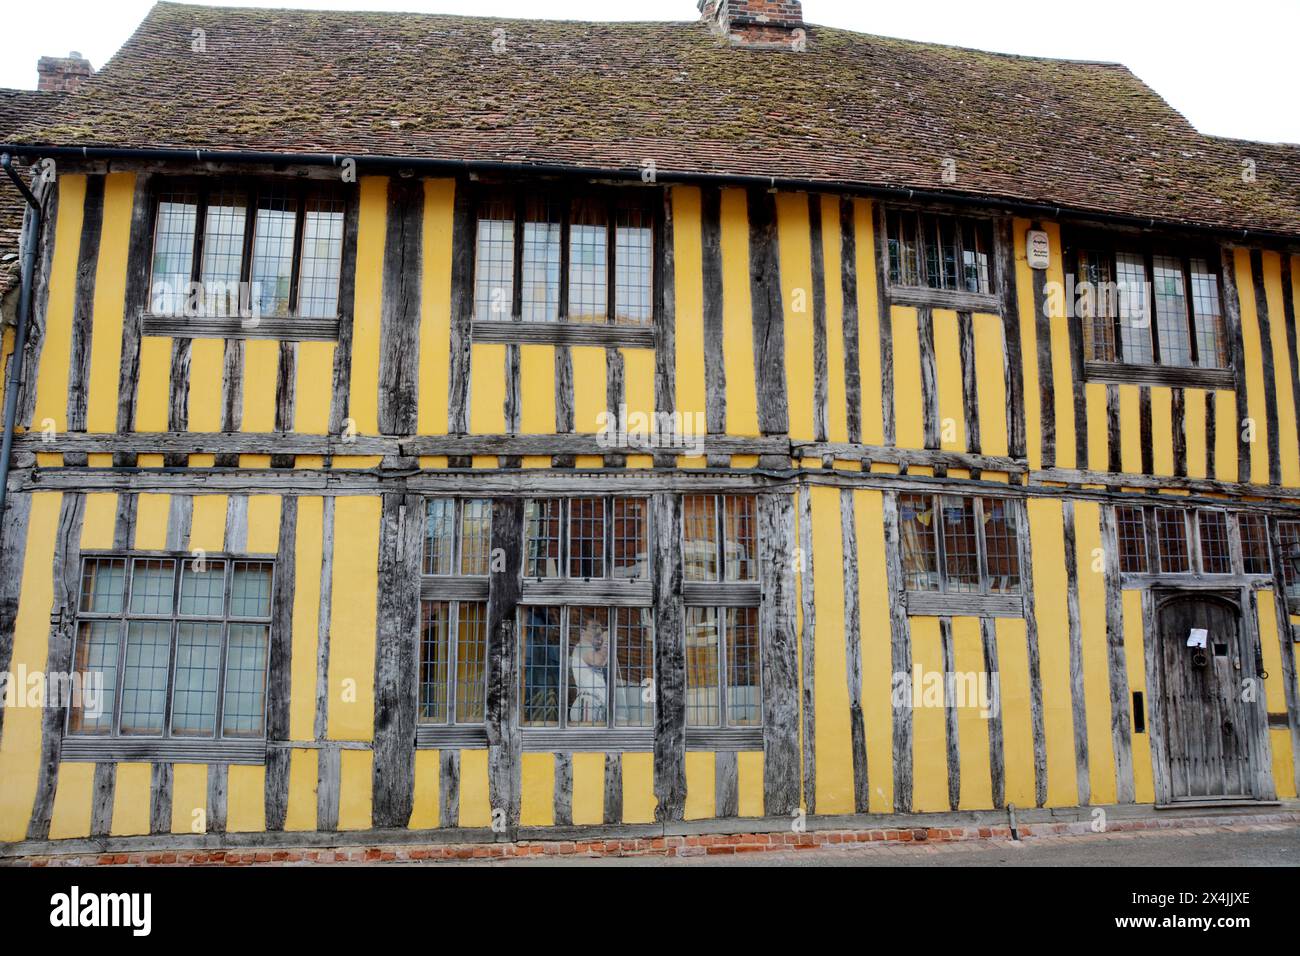 Old medieval half-timbered 'crooked houses' in the village of Lavenham in Suffolk county, England, United Kingdom. Stock Photo